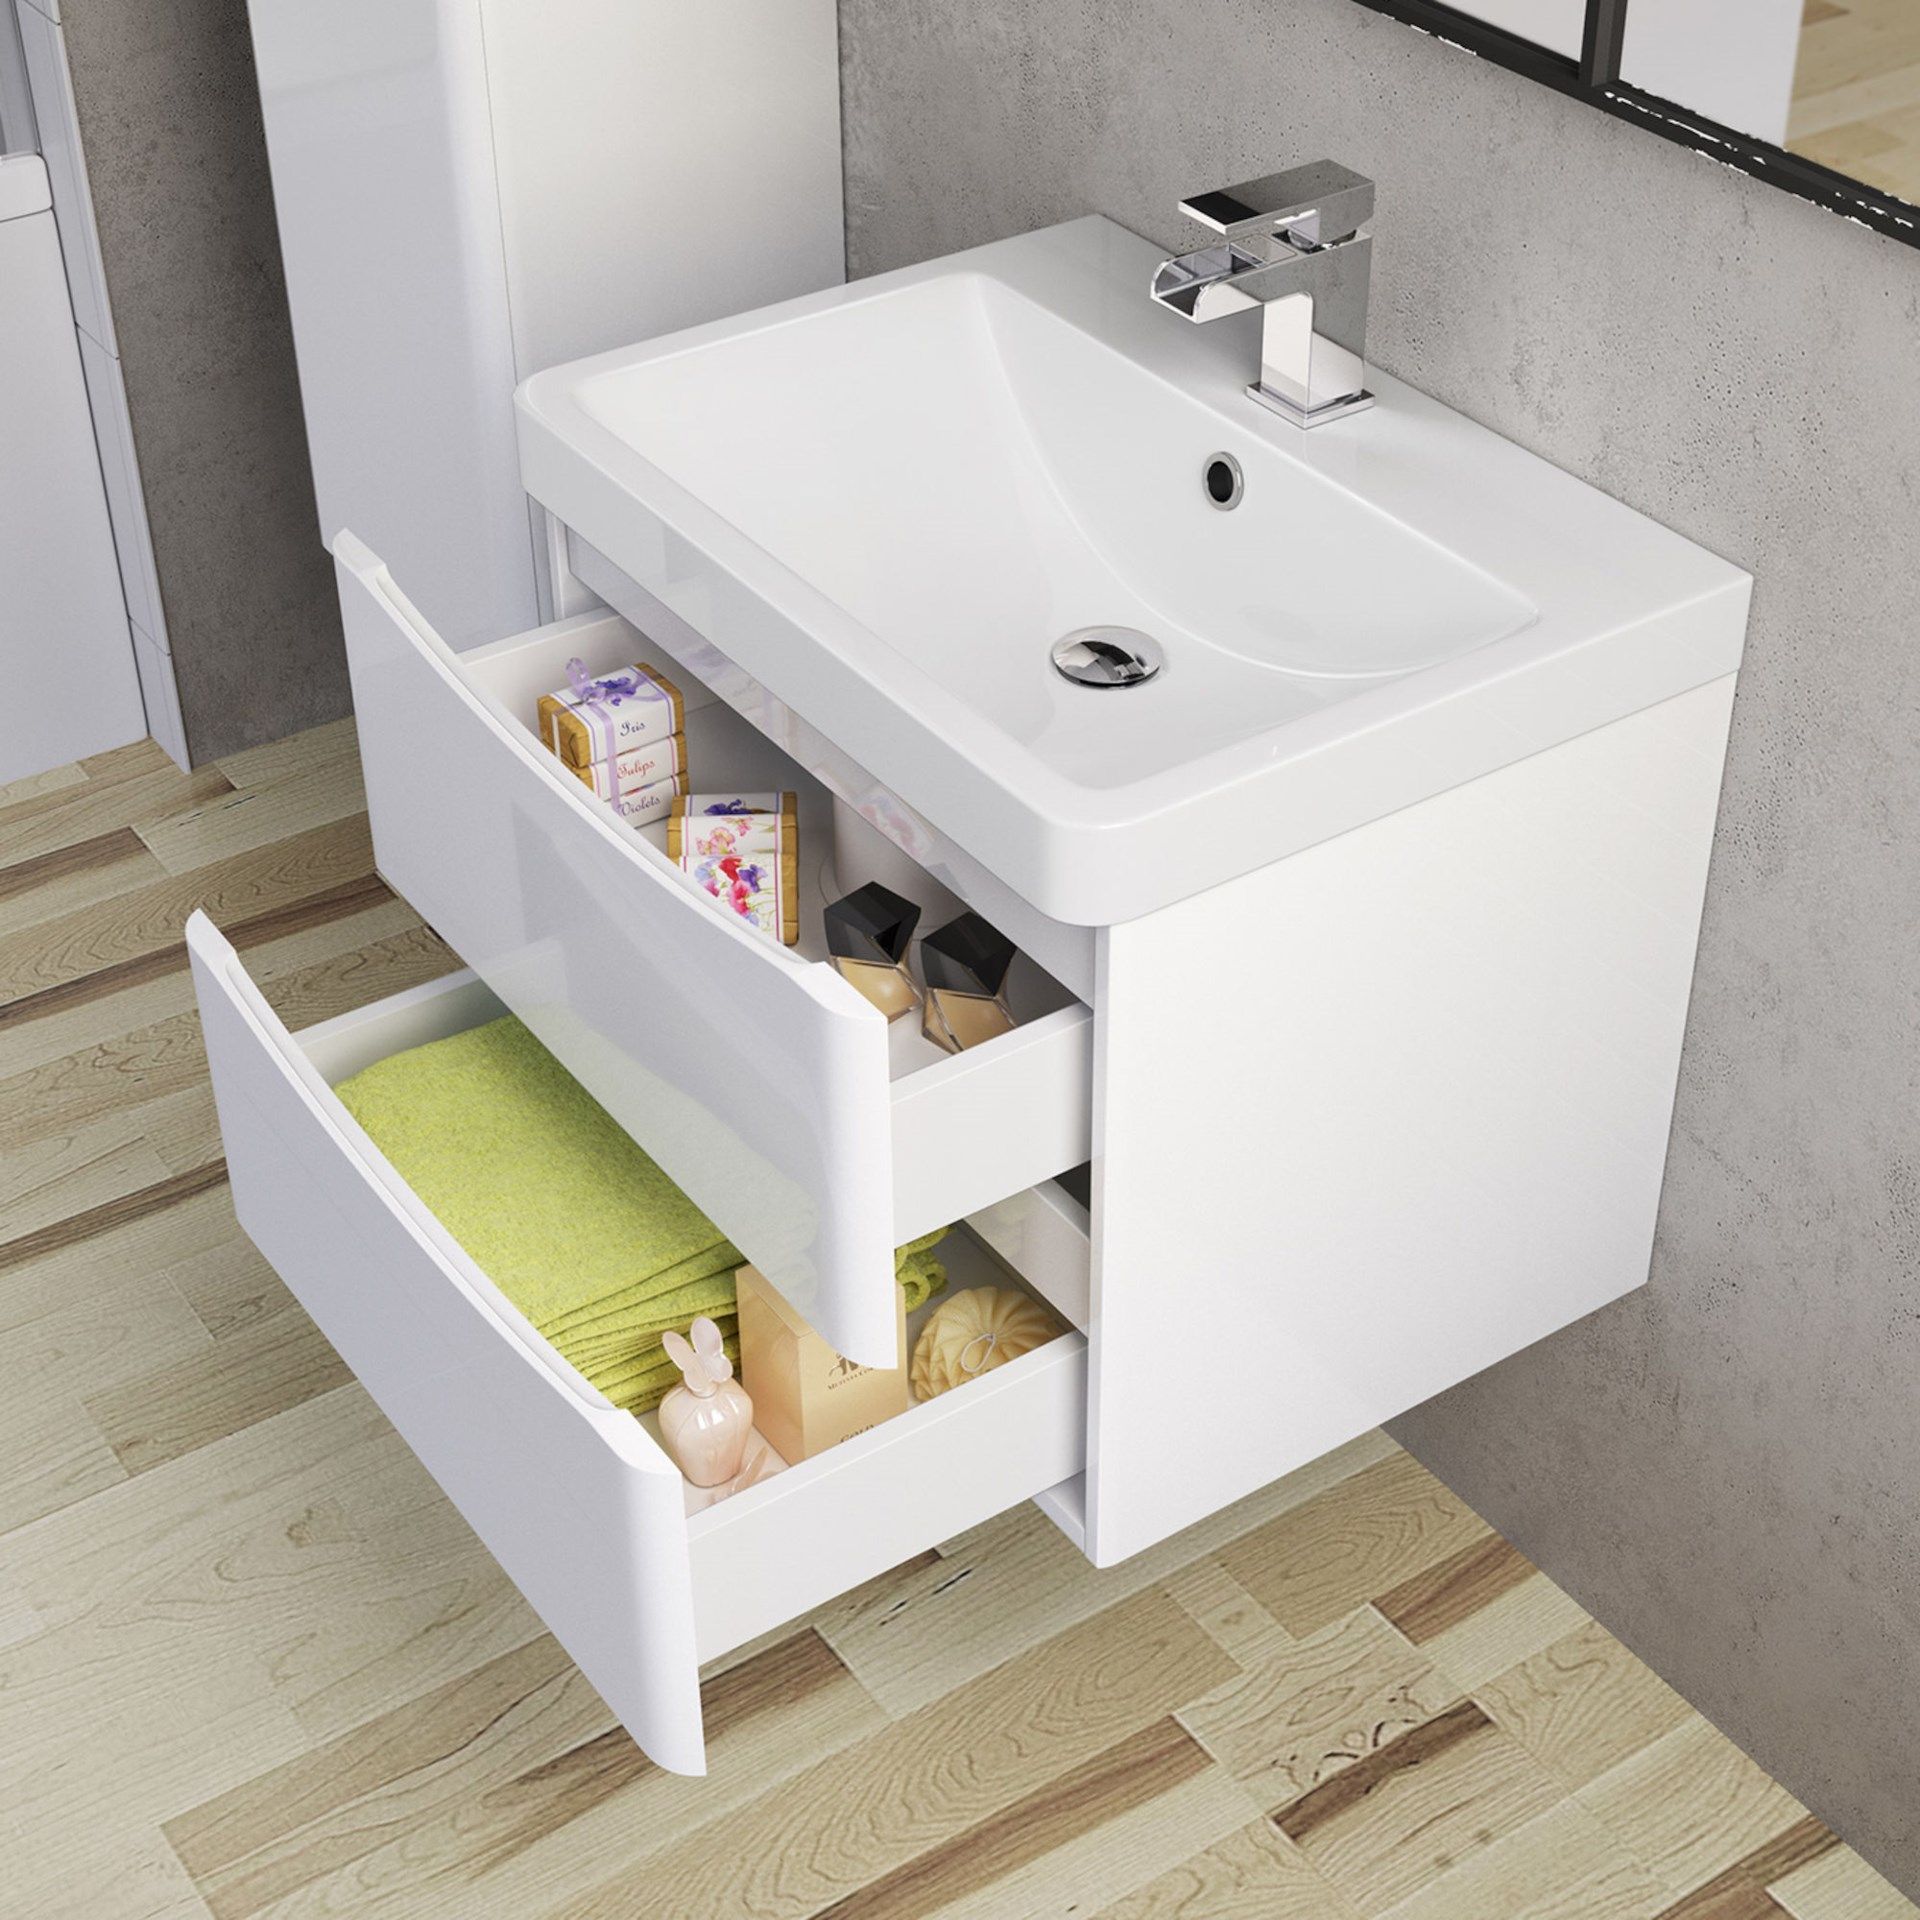 BRAND NEW BOXED 600mm Austin II Gloss White Built In Basin Drawer Unit - Wall Hung.RRP £499.99.Comes - Image 2 of 3